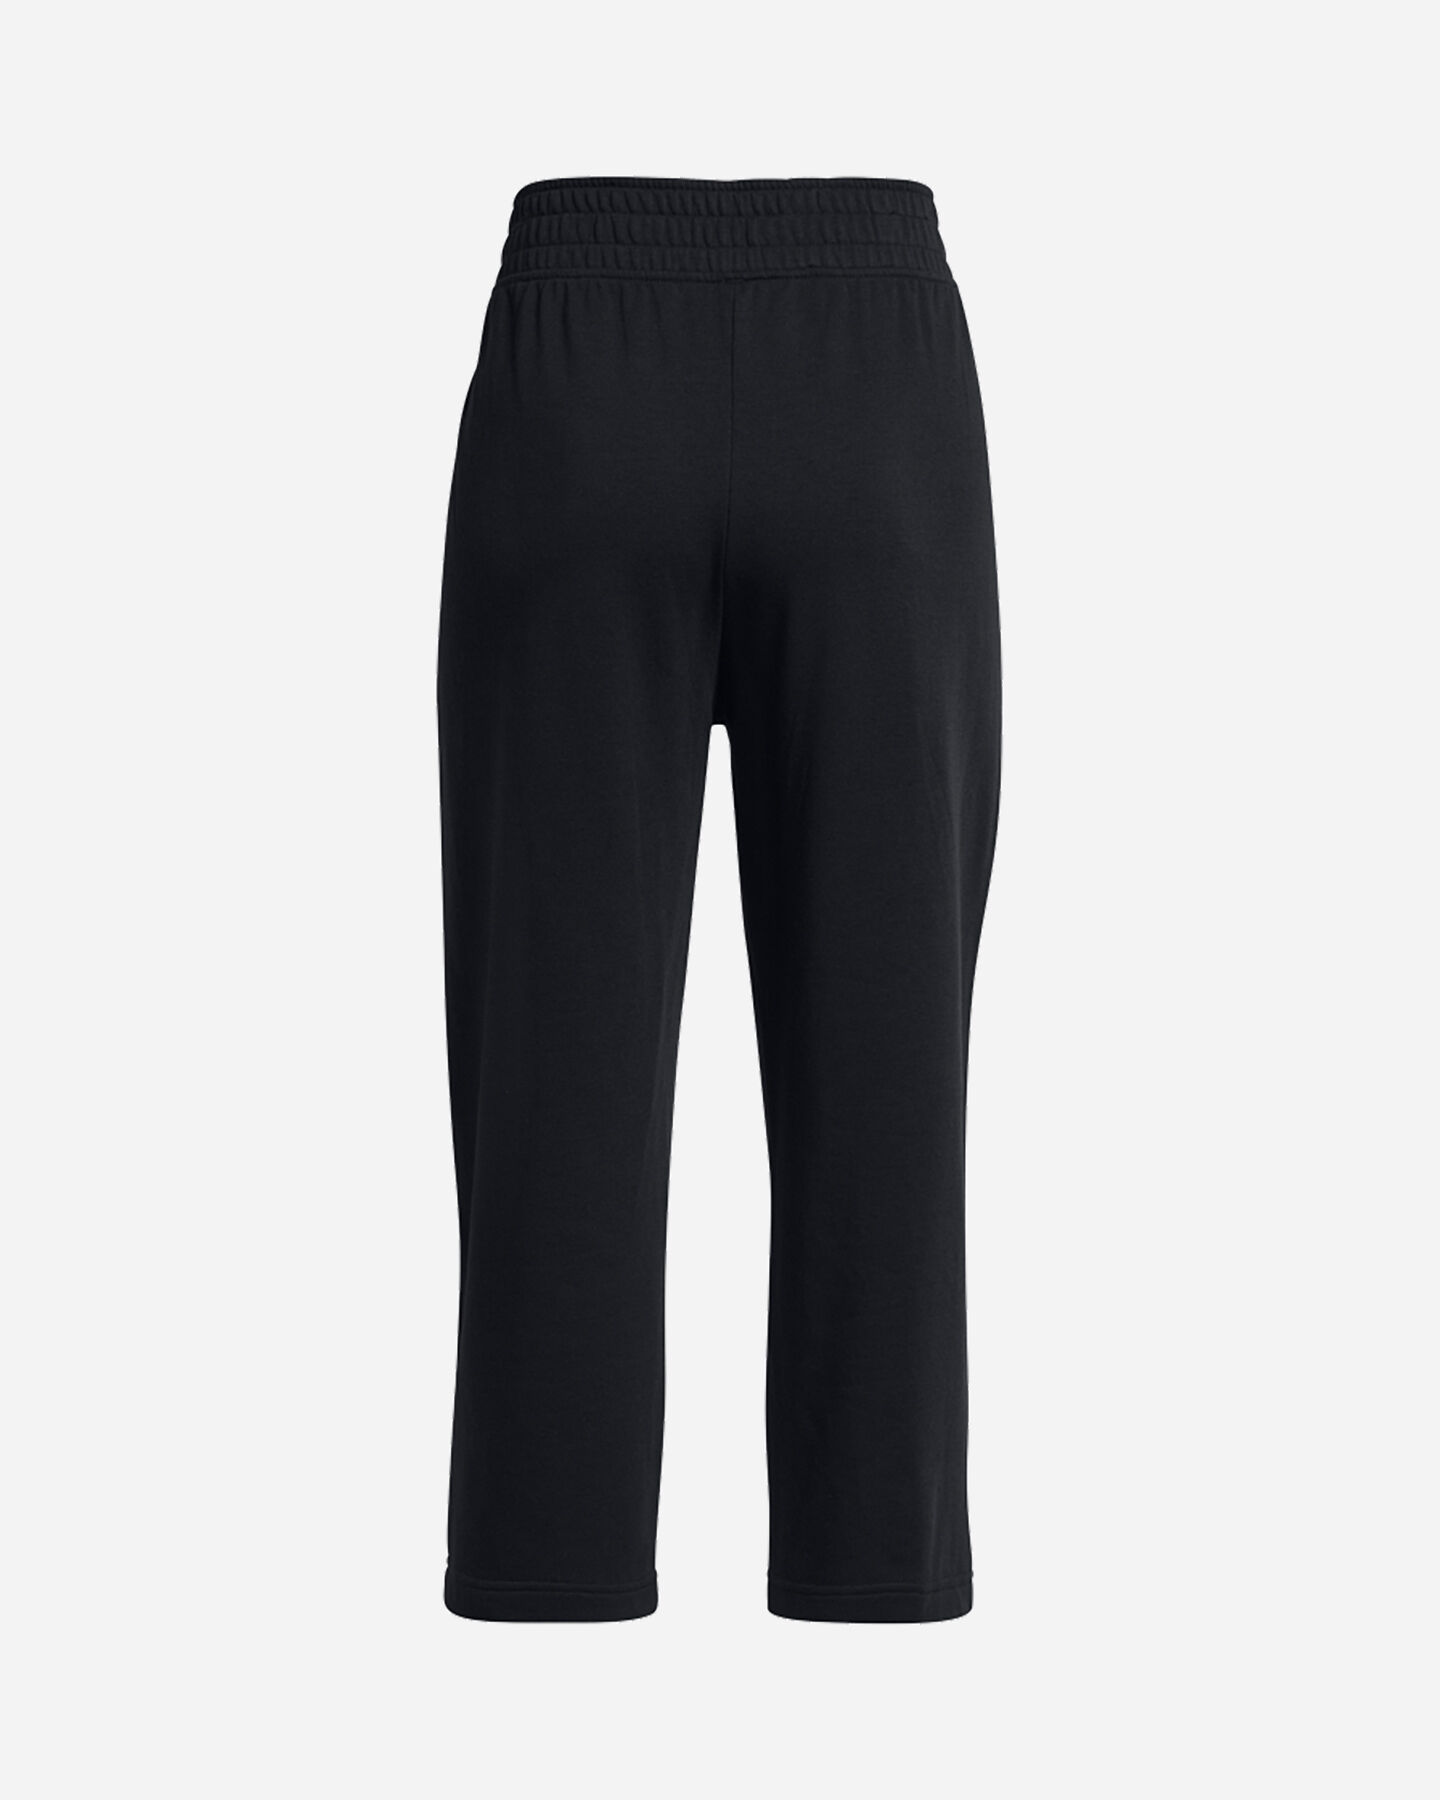  Pantalone UNDER ARMOUR RIVAL TERRY W S5641562|0001|XS scatto 1